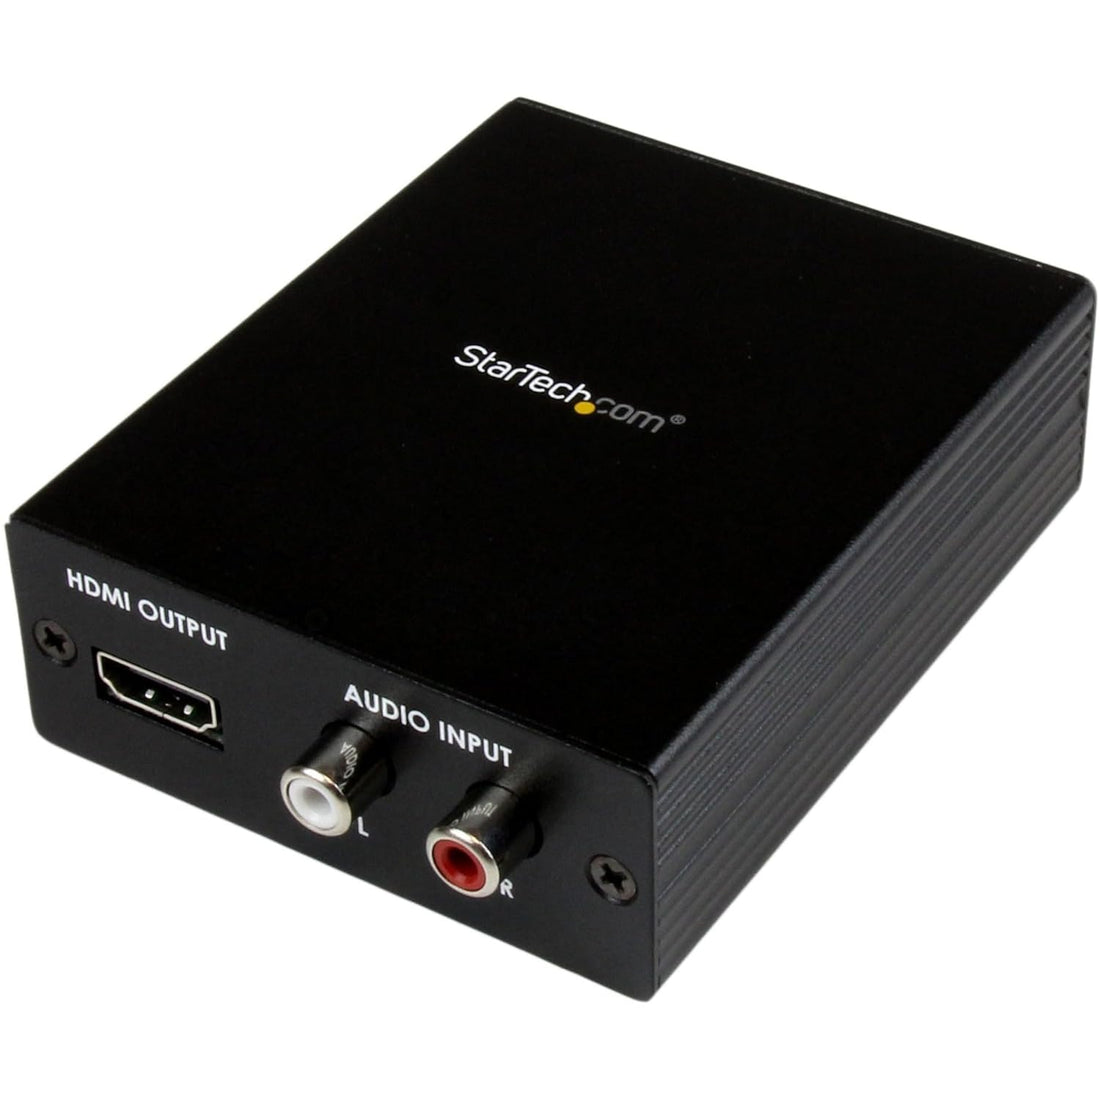 StarTech.com Component (YPbPr) / VGA to HDMI Converter with Audio - PC to HDMI - Resolutions up to 1080p (HDTV) and 1920 x 1200 (PC) (VGA2HD2)